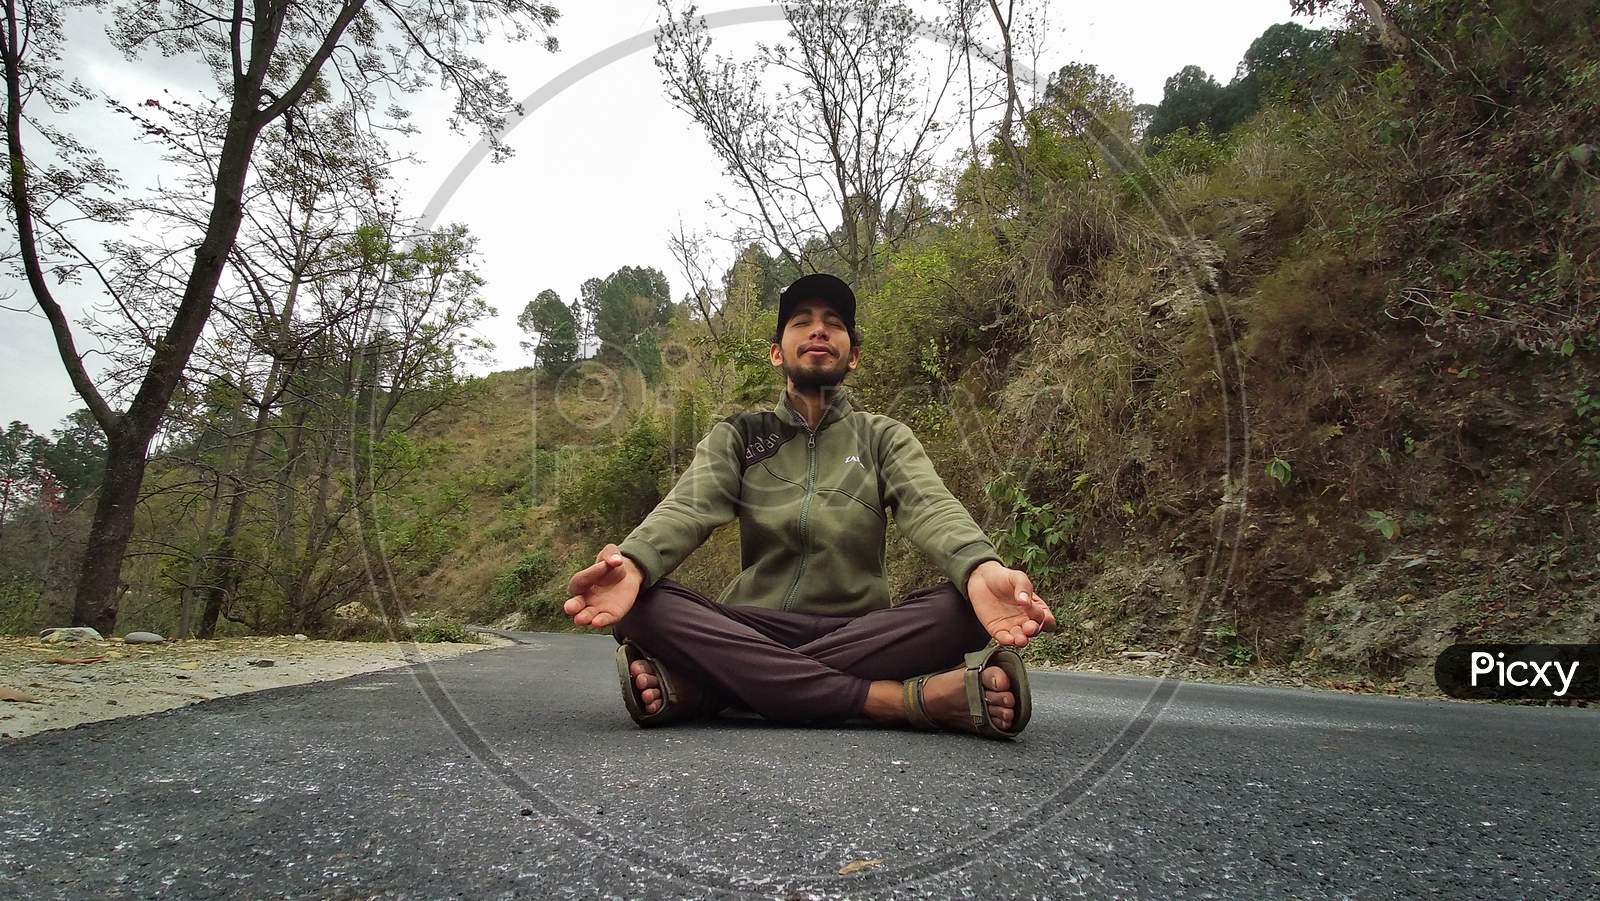 A BOY DOING YOGA ON THE ROAD